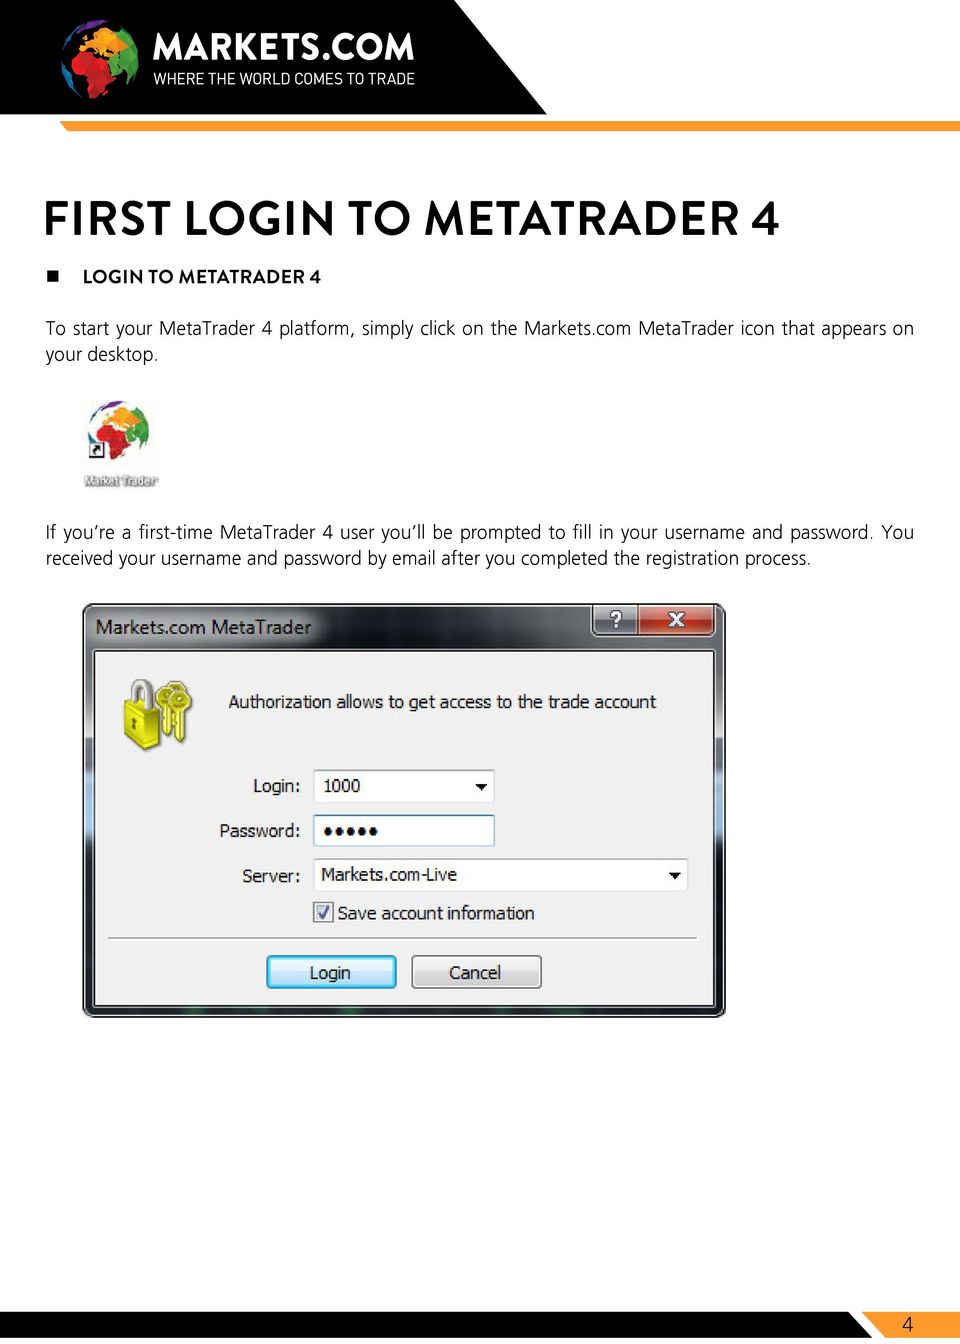 If you re a first-time MetaTrader 4 user you ll be prompted to fill in your username and